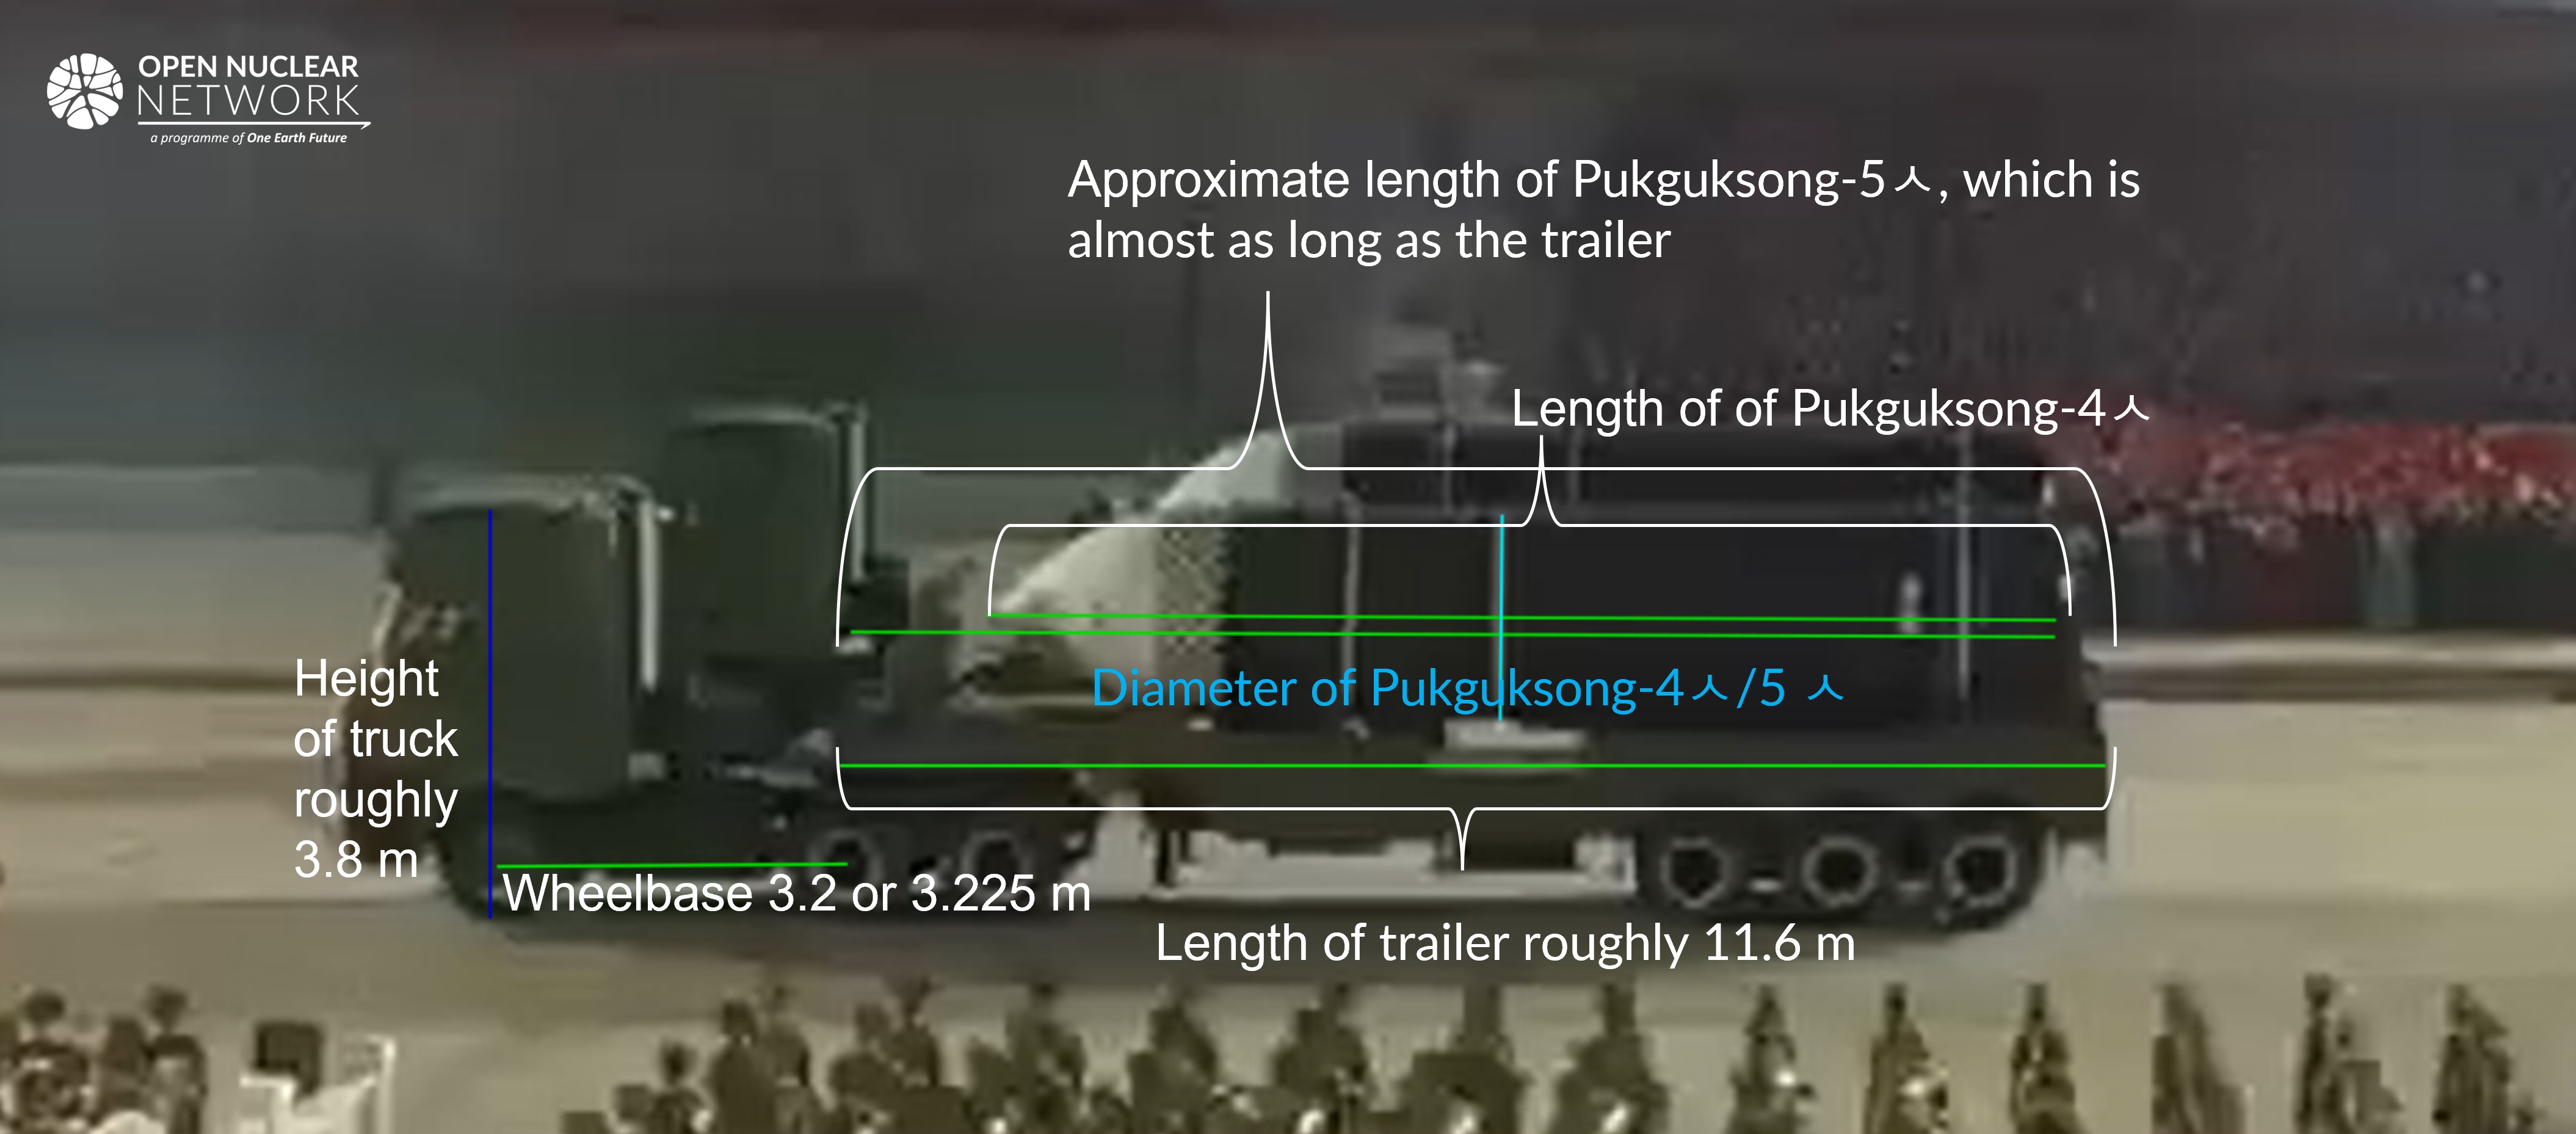 Figure 3-A rough measurement of the length of the Pukguksong-4